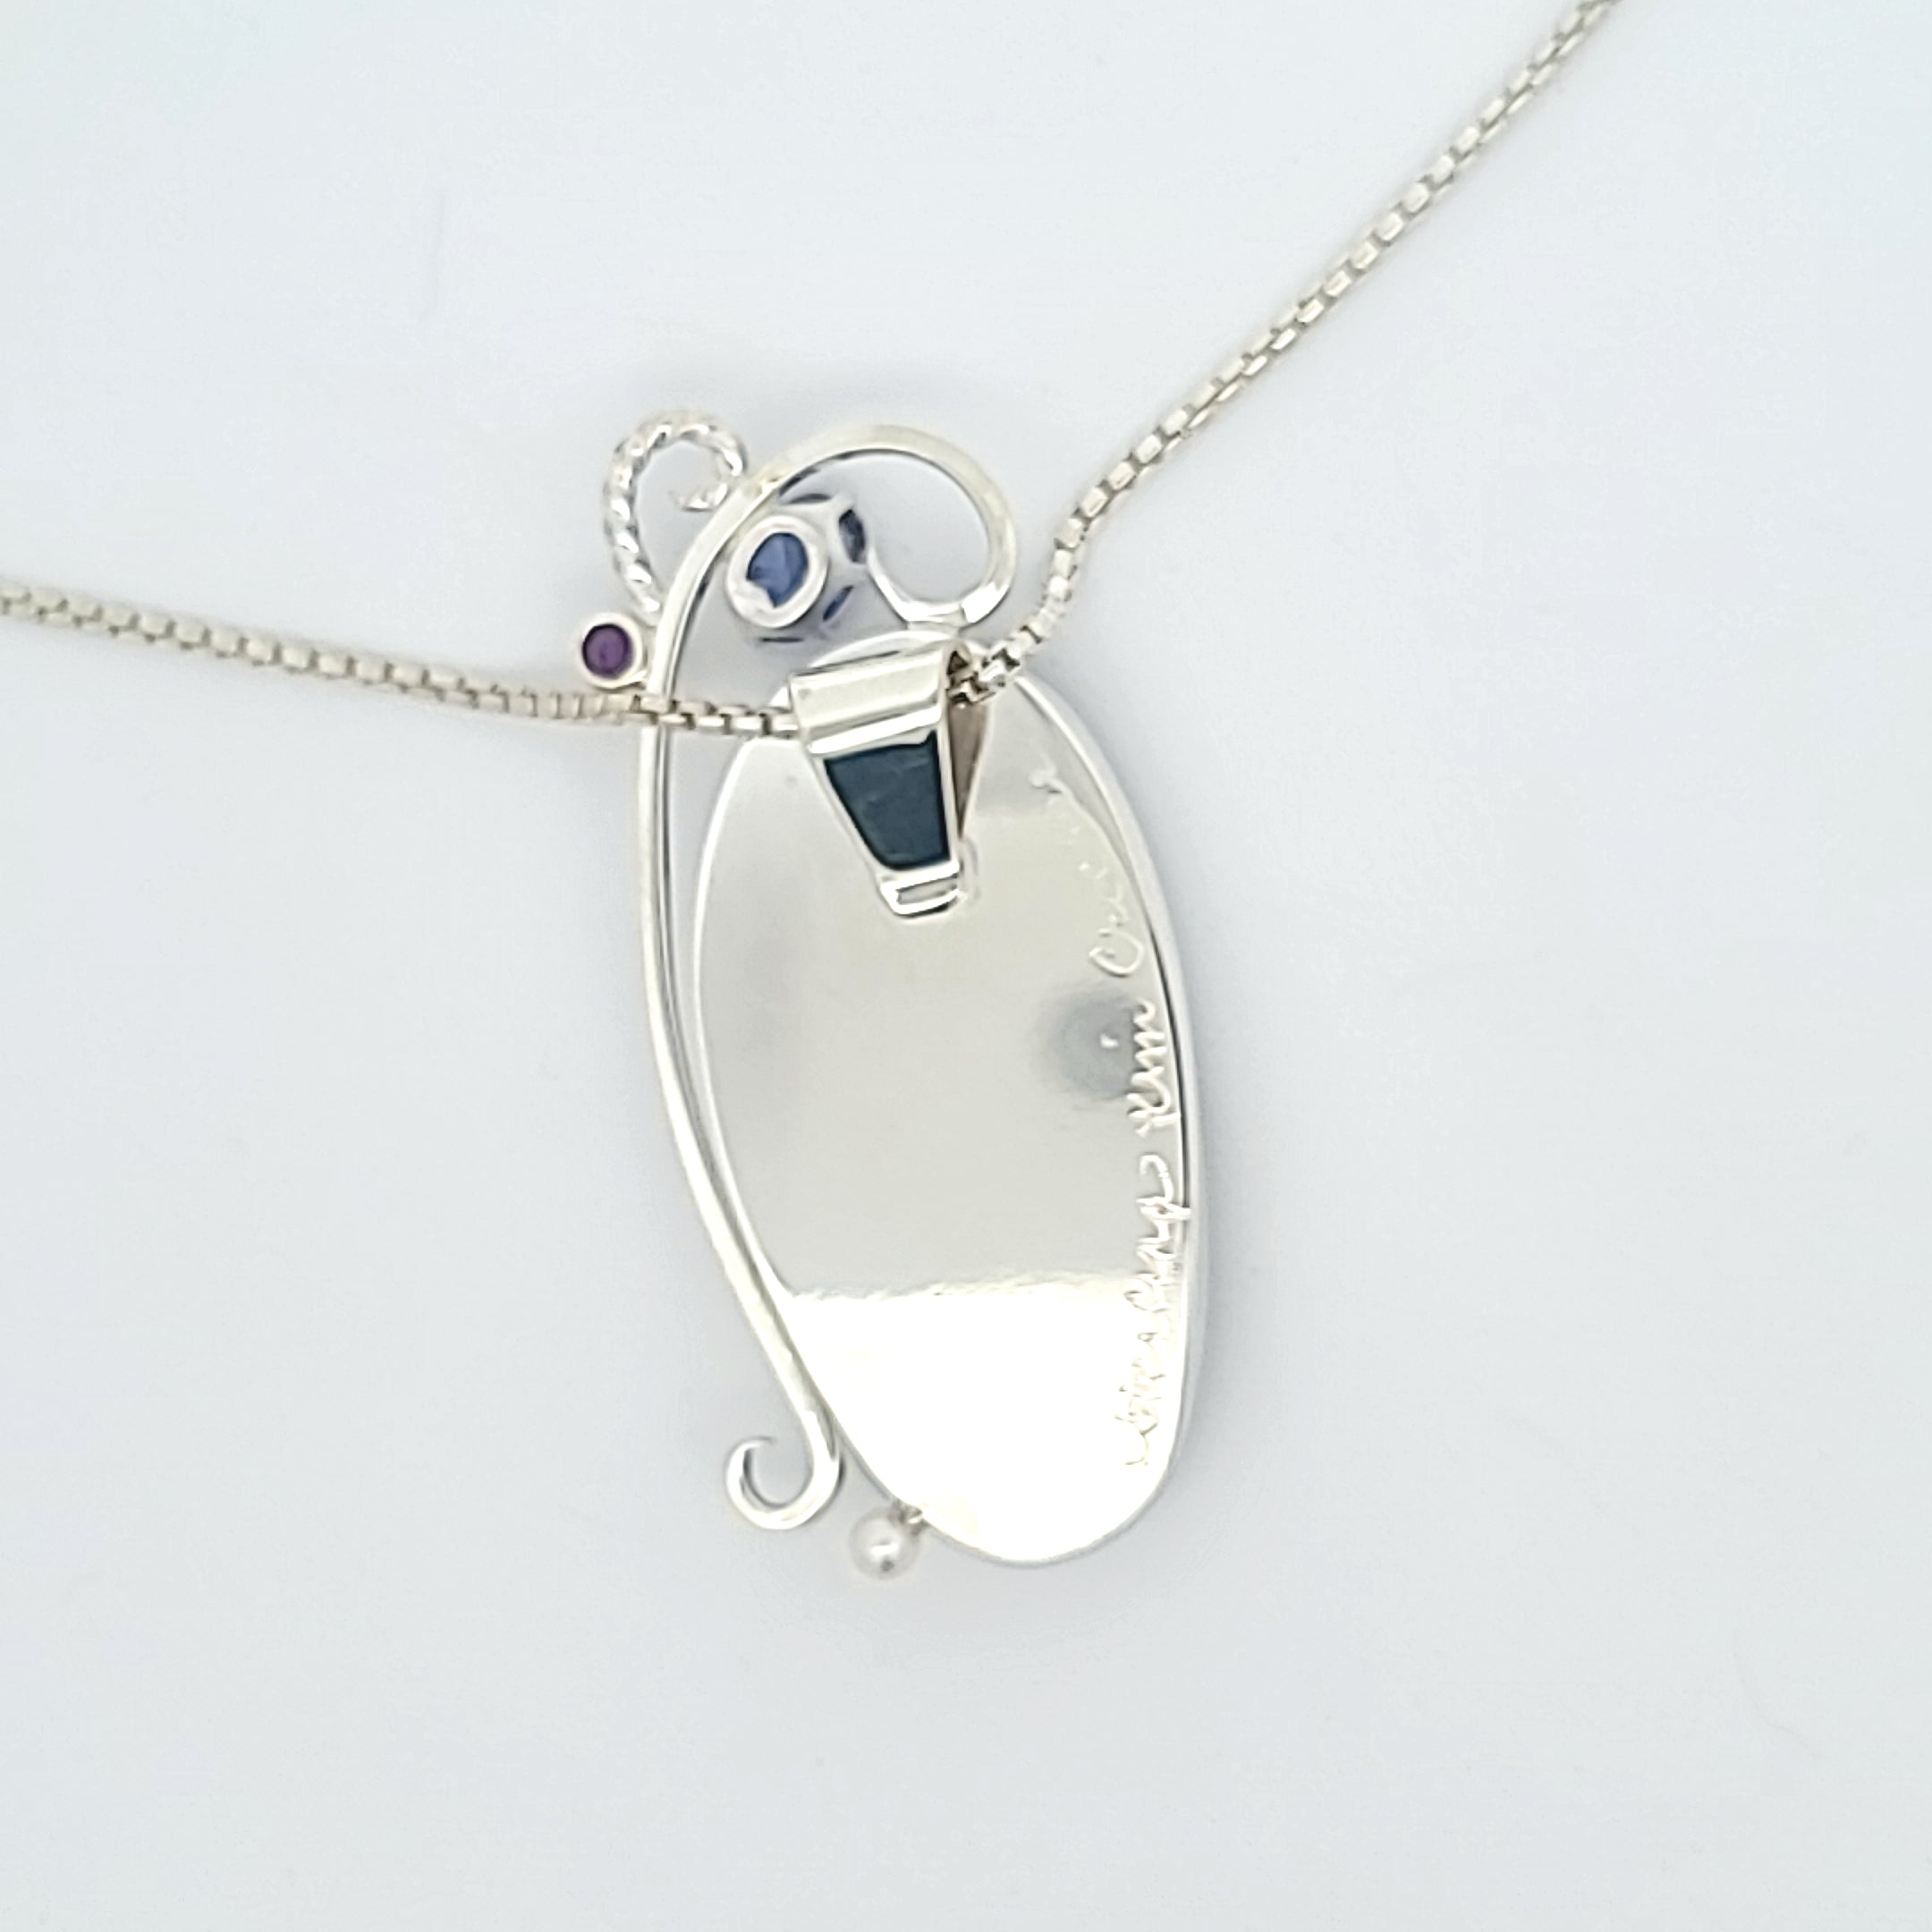 Forget Me Not Opal and Pearl Locket – DinnerWear Jewelry